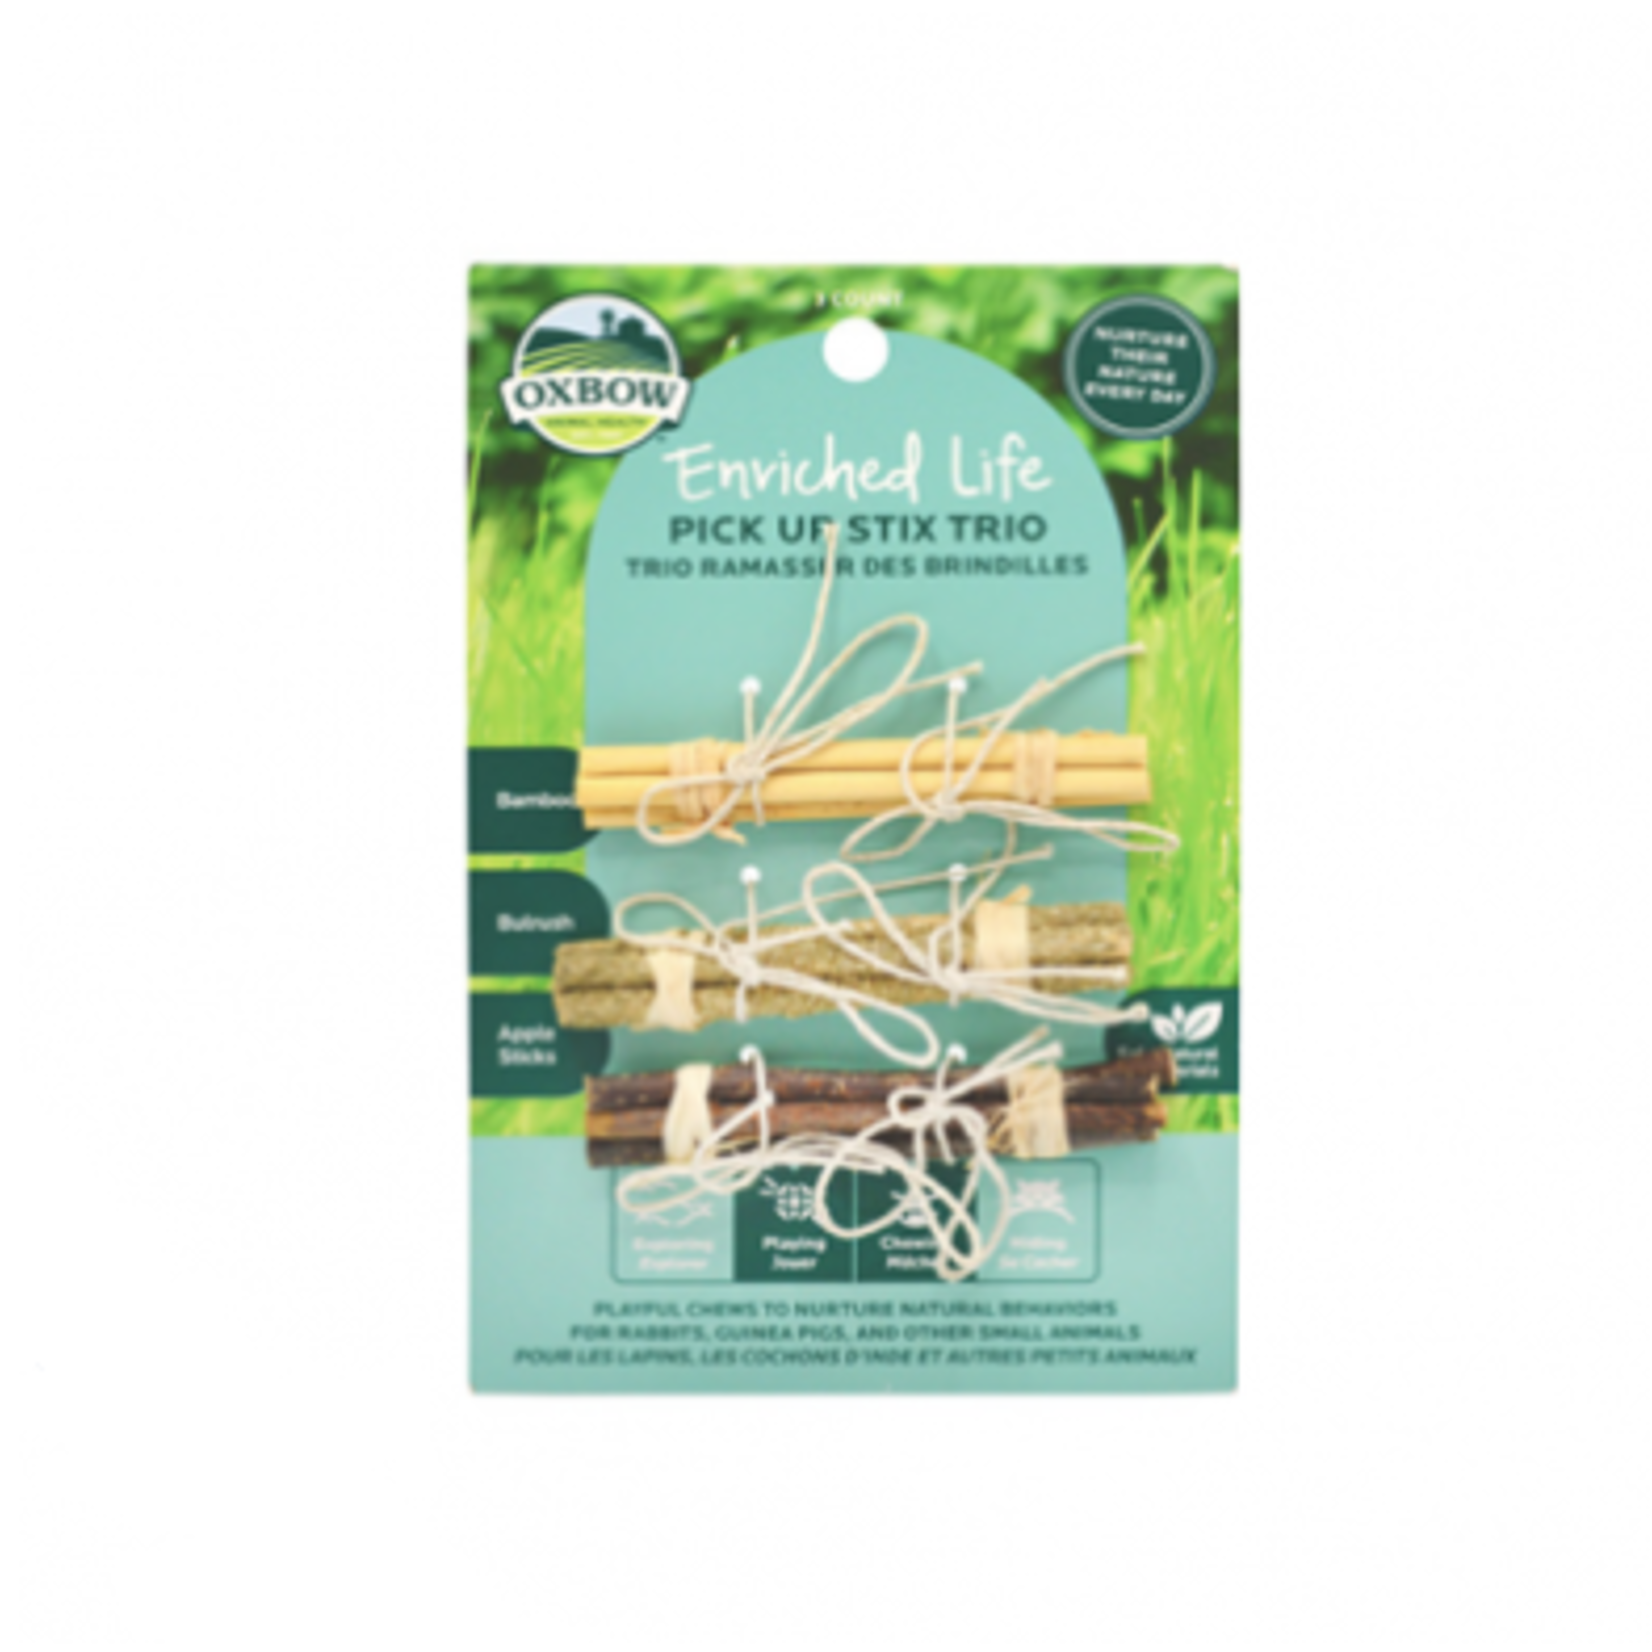 Oxbow Enriched Life - Pick up Stick Trio